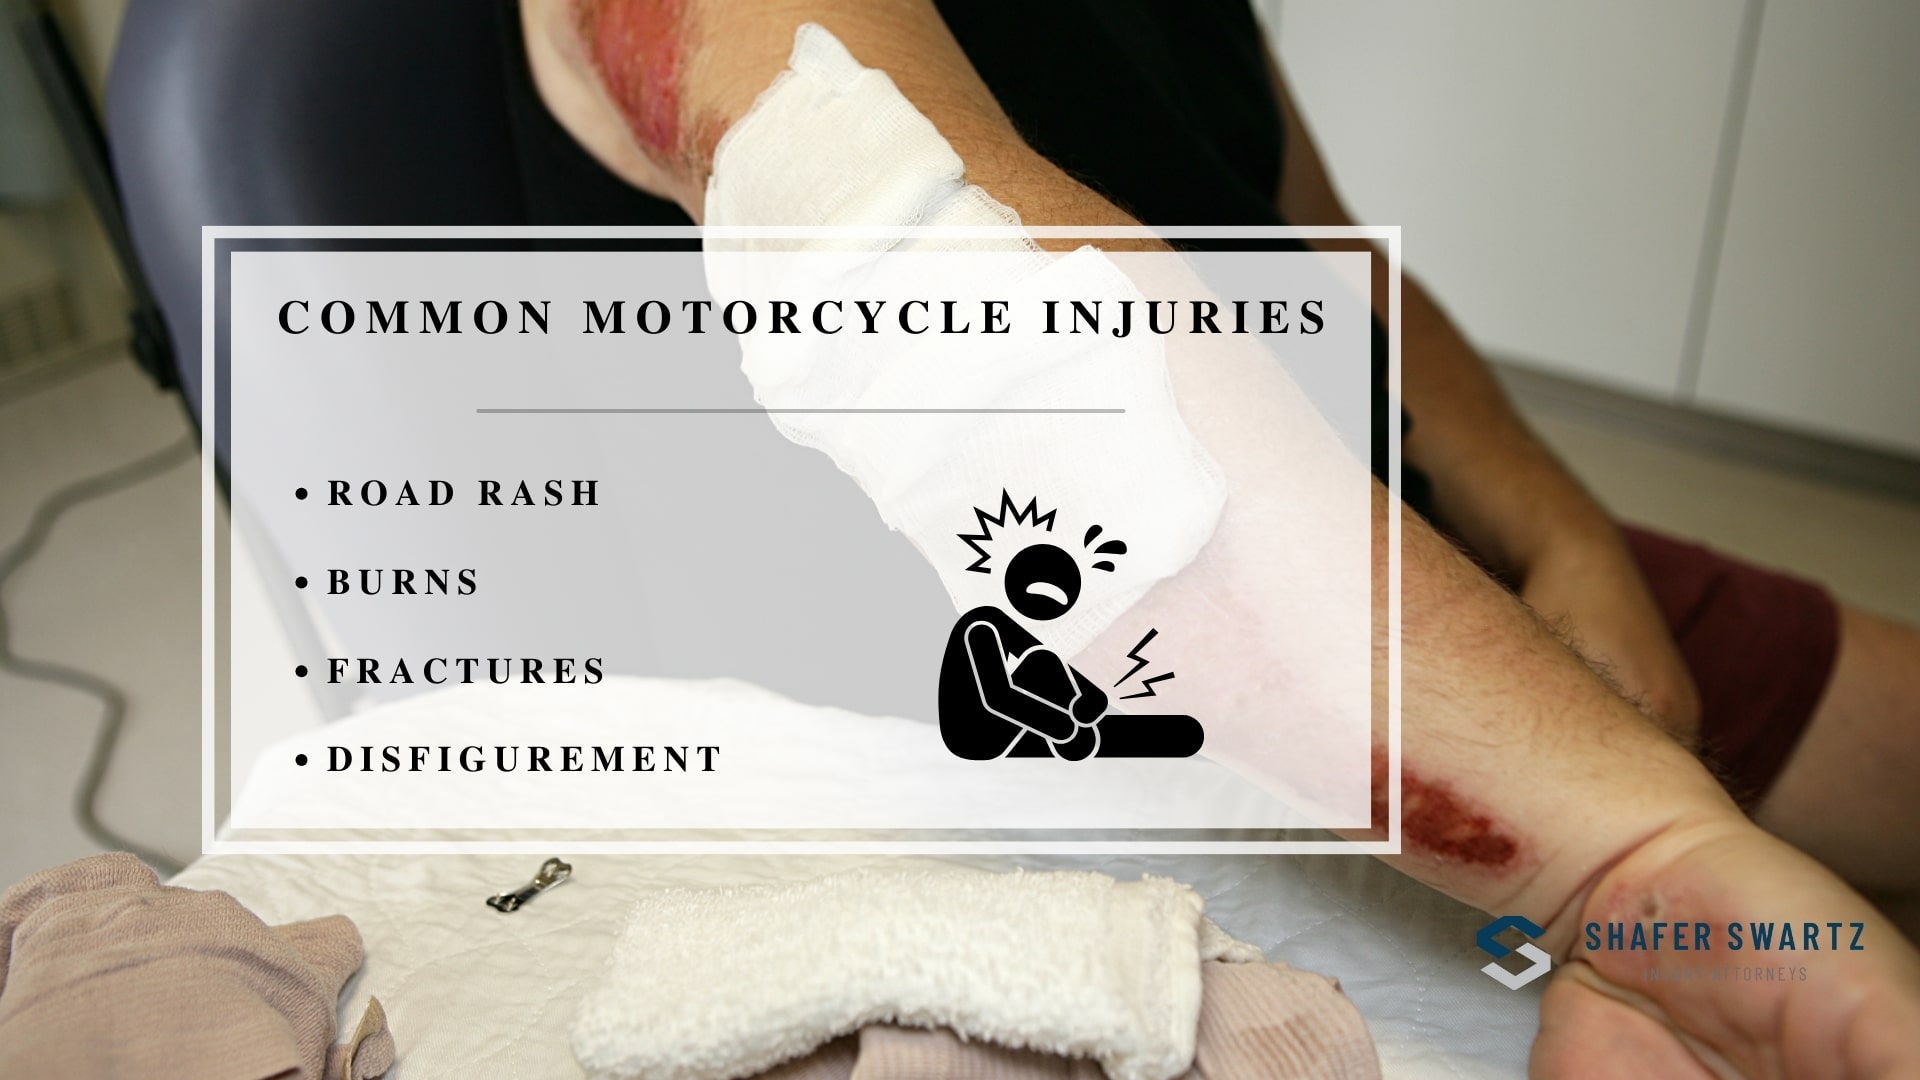 Infographic image of common motorcycle injuries